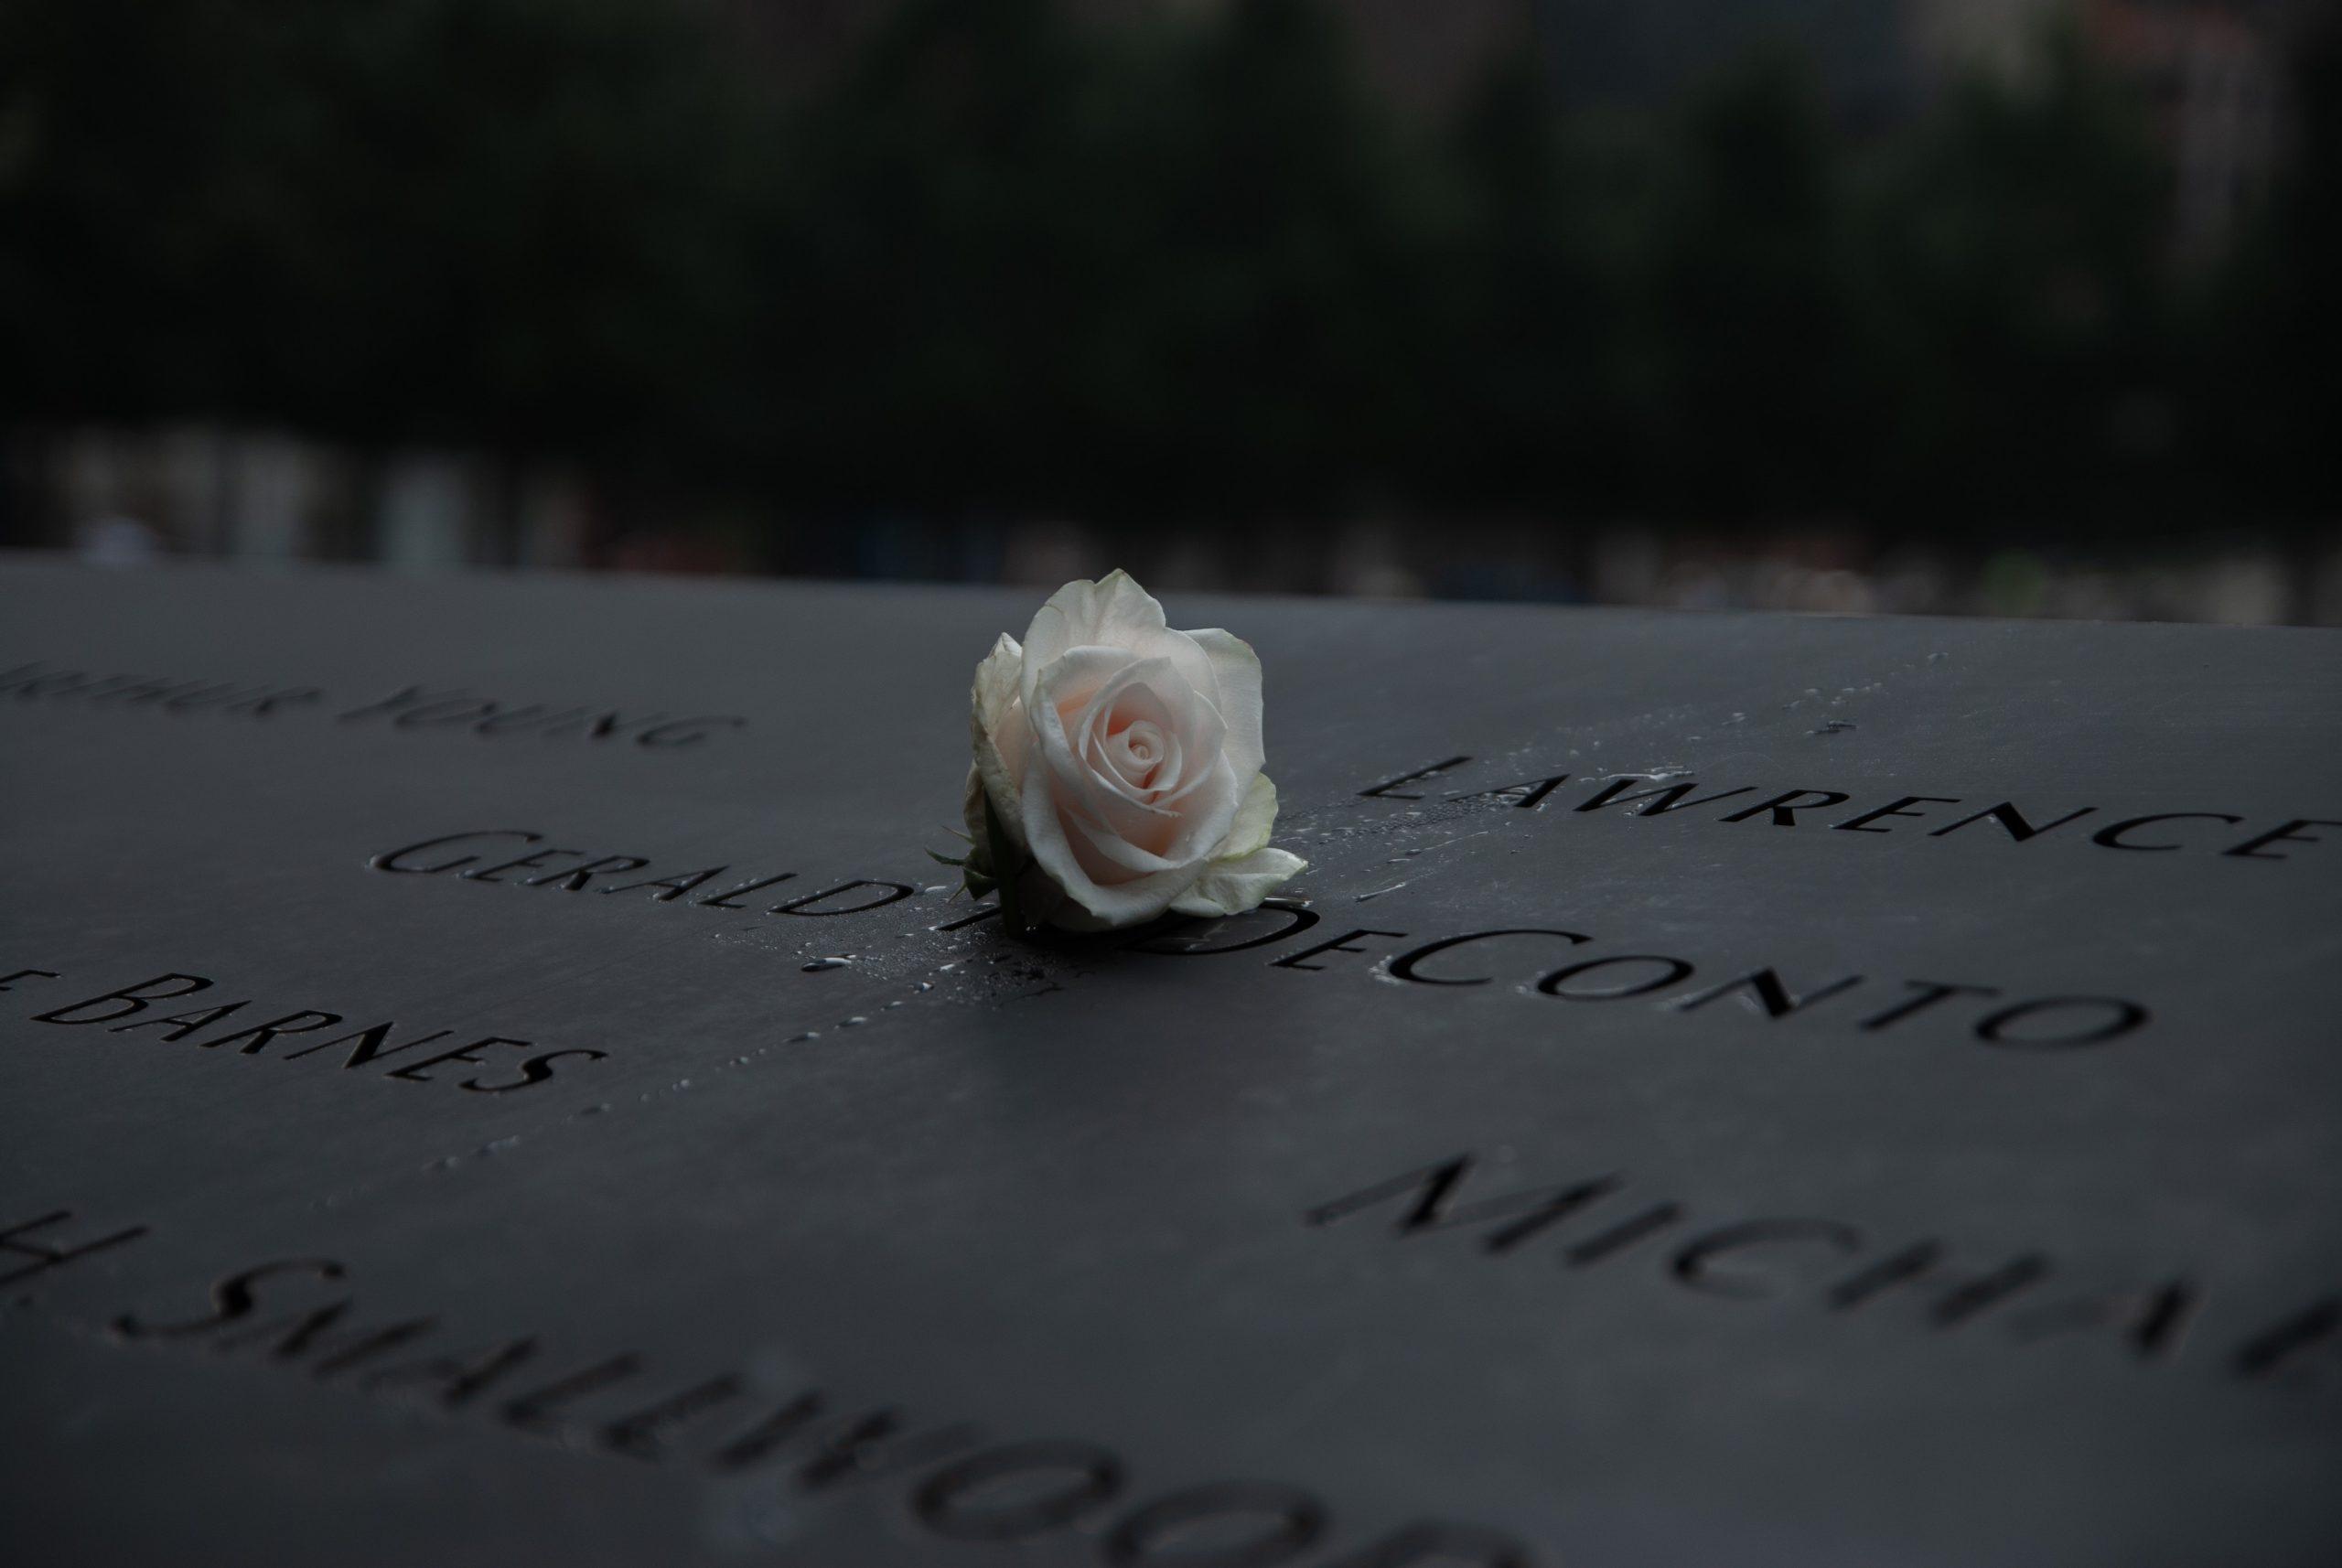 The National 9/11 Memorial and Museum